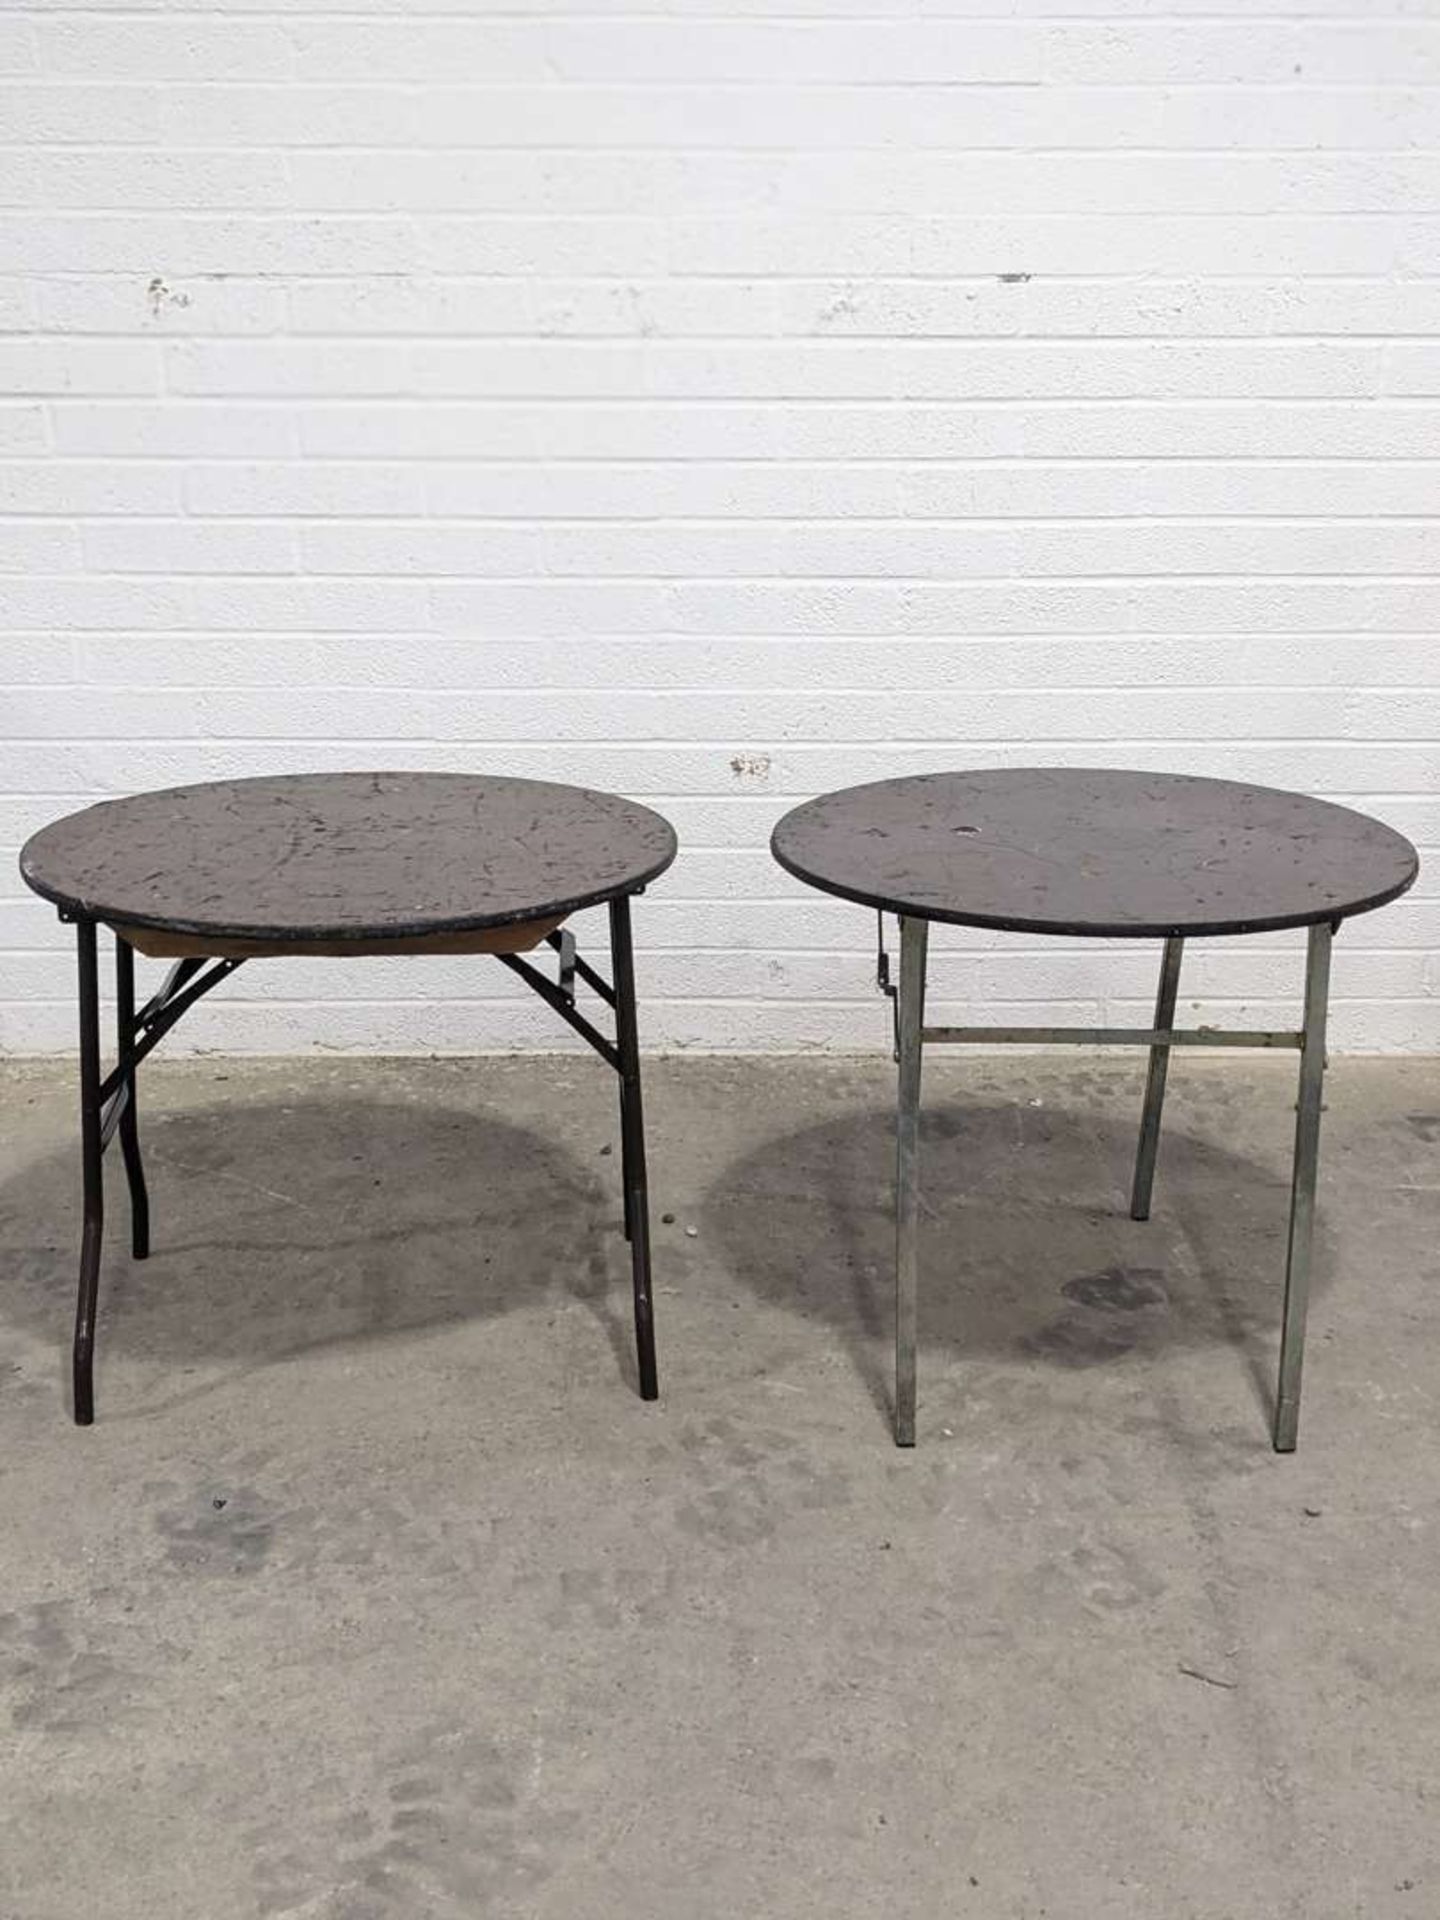 3ft Heavy Duty Round Tables